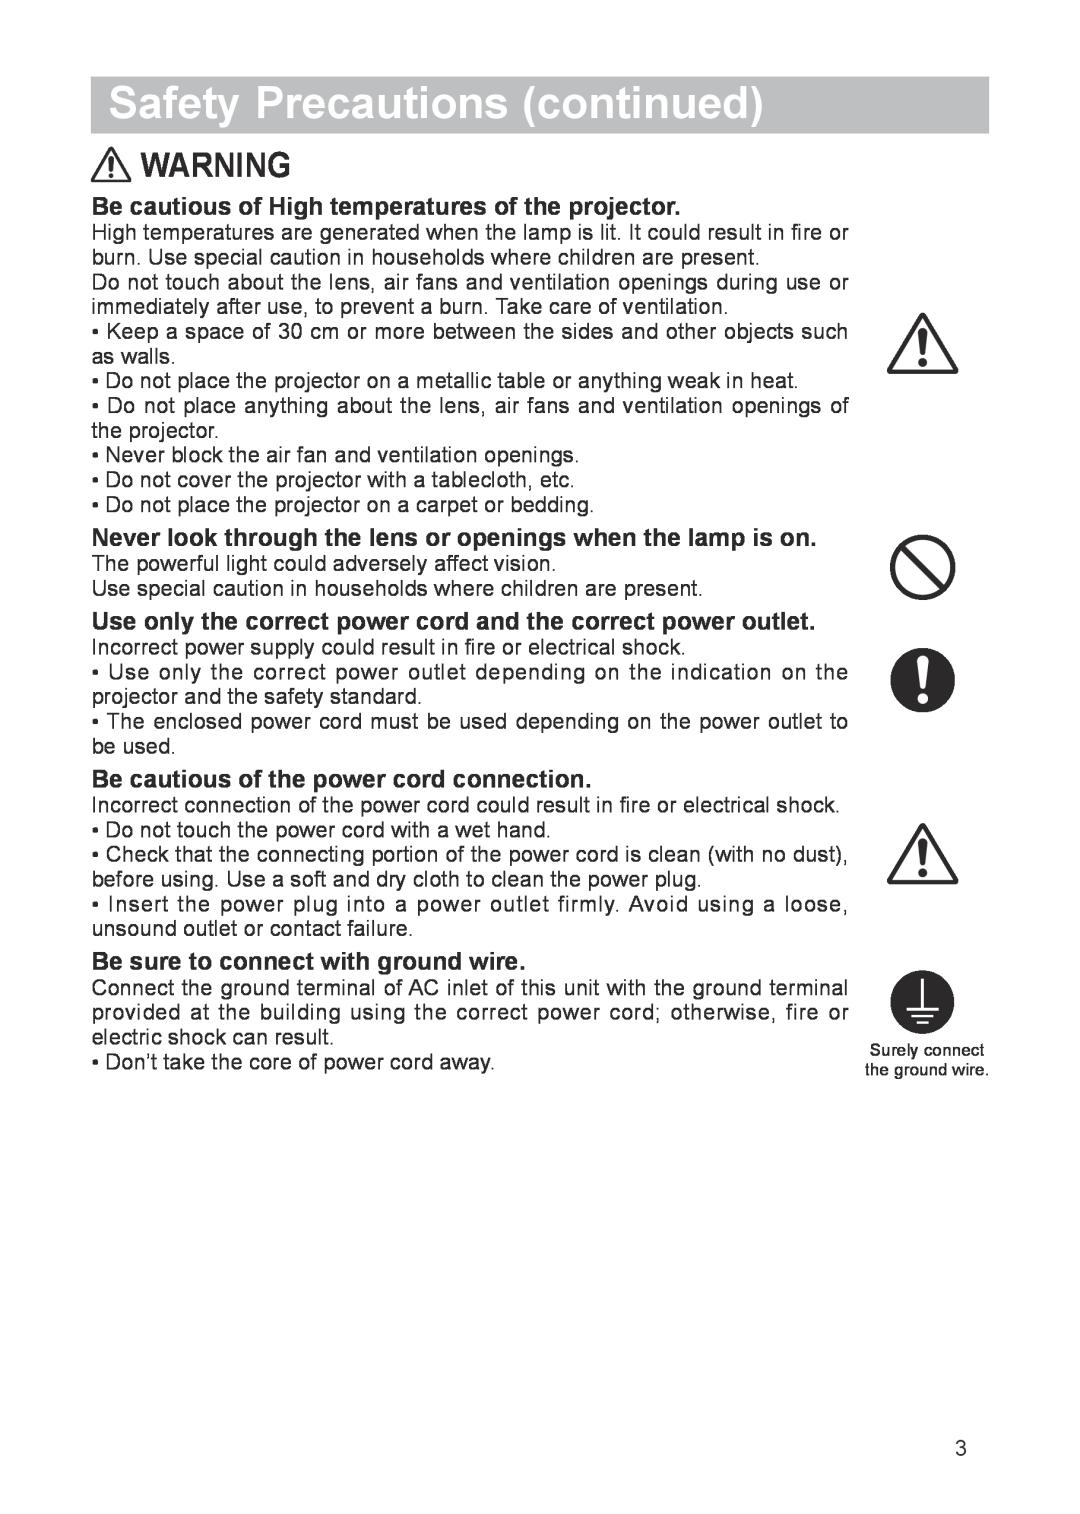 Dukane 8763 user manual Safety Precautions continued, Be cautious of High temperatures of the projector 